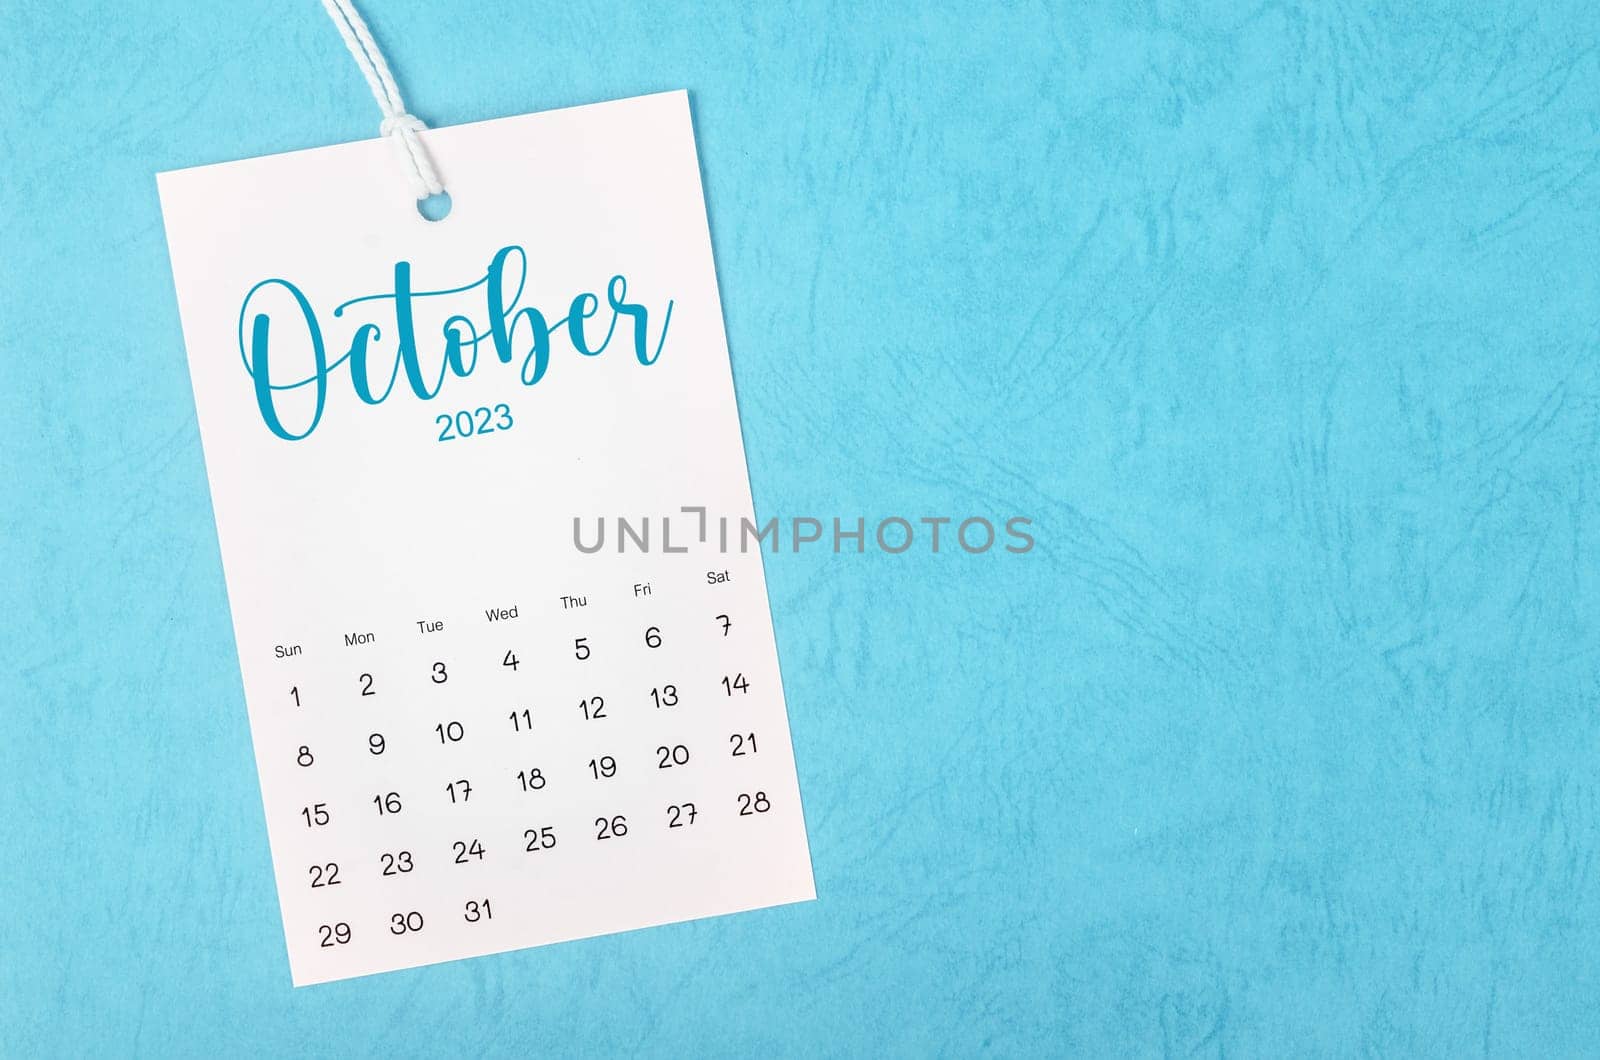 The 2023 October calendar page hanged on white rope on blue background. by Gamjai